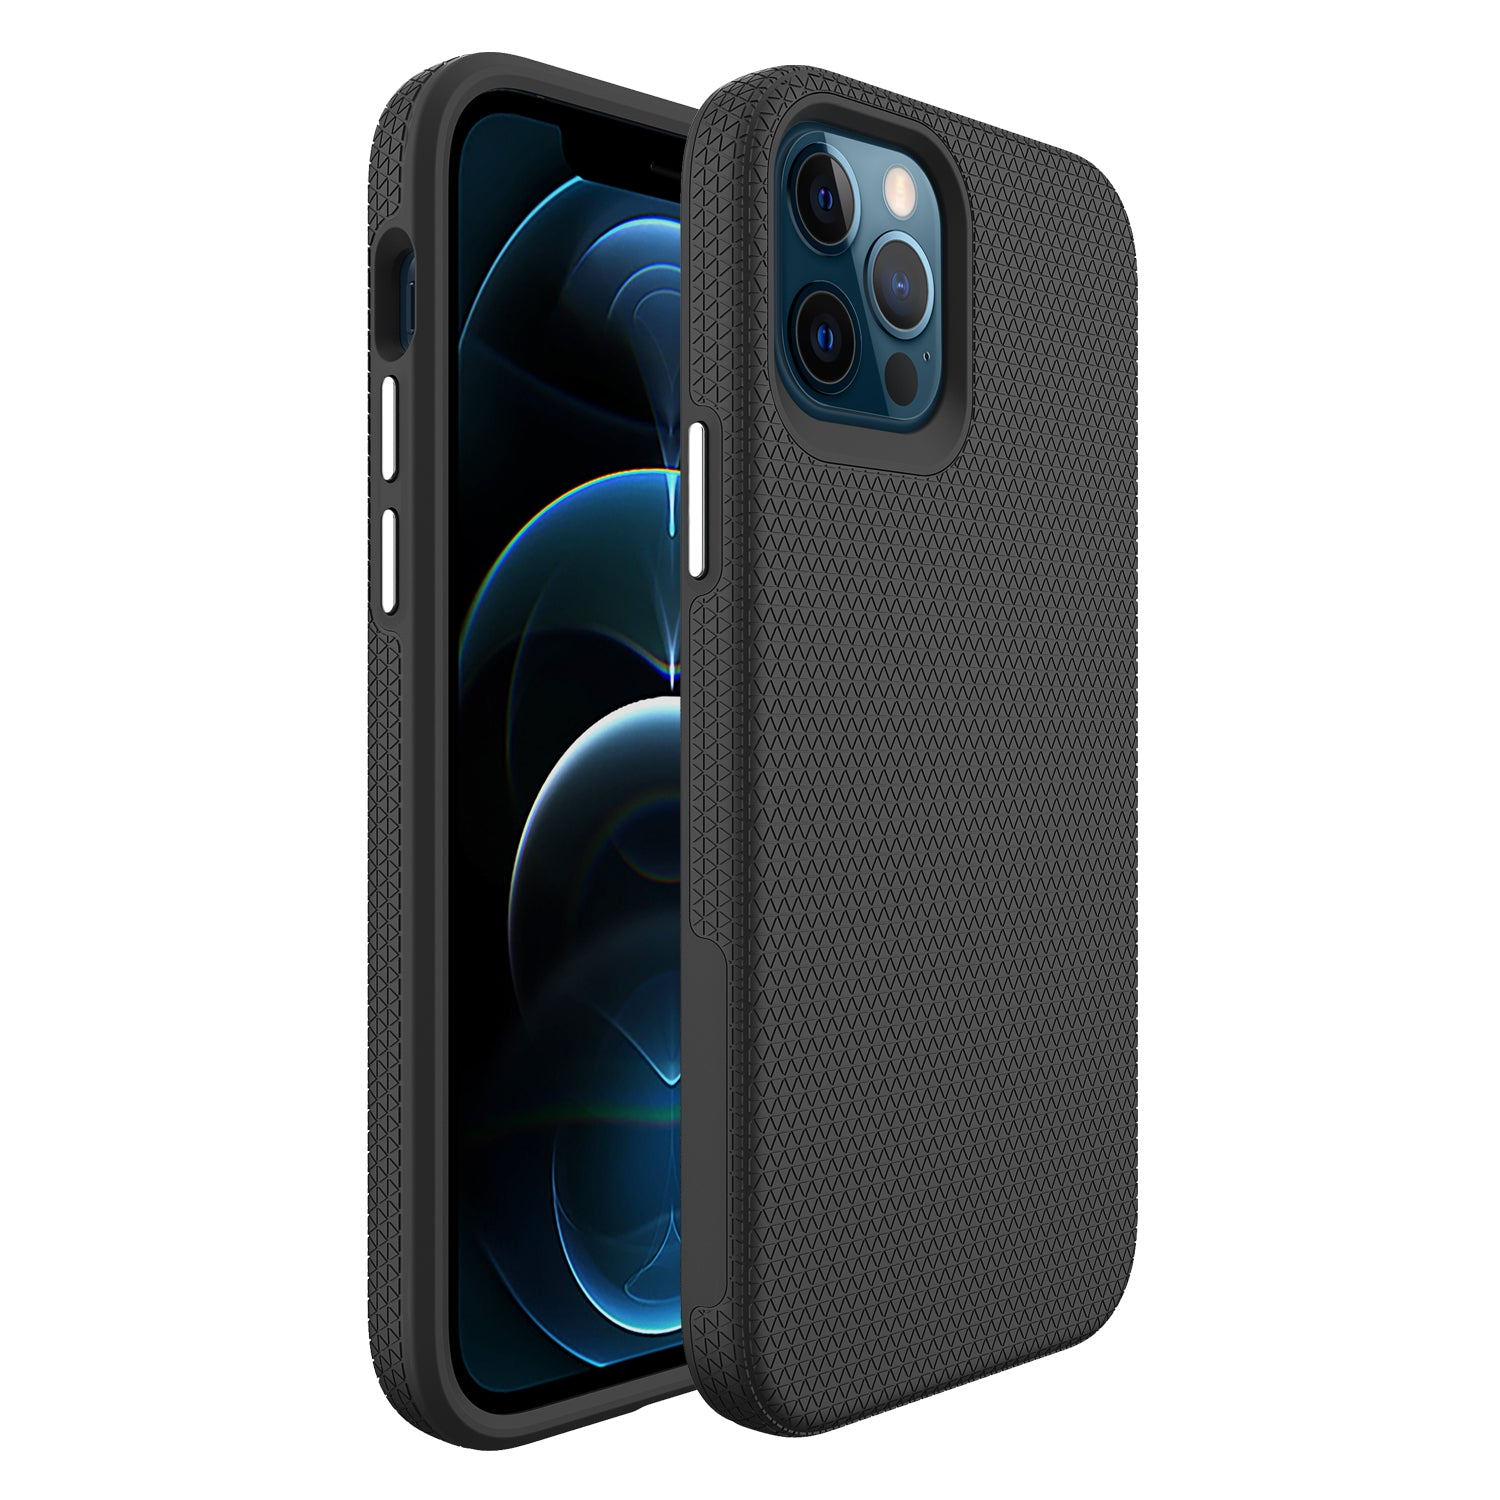 ZEOS Sphinx Dual Layer Case for iPhone 12 Pro Max